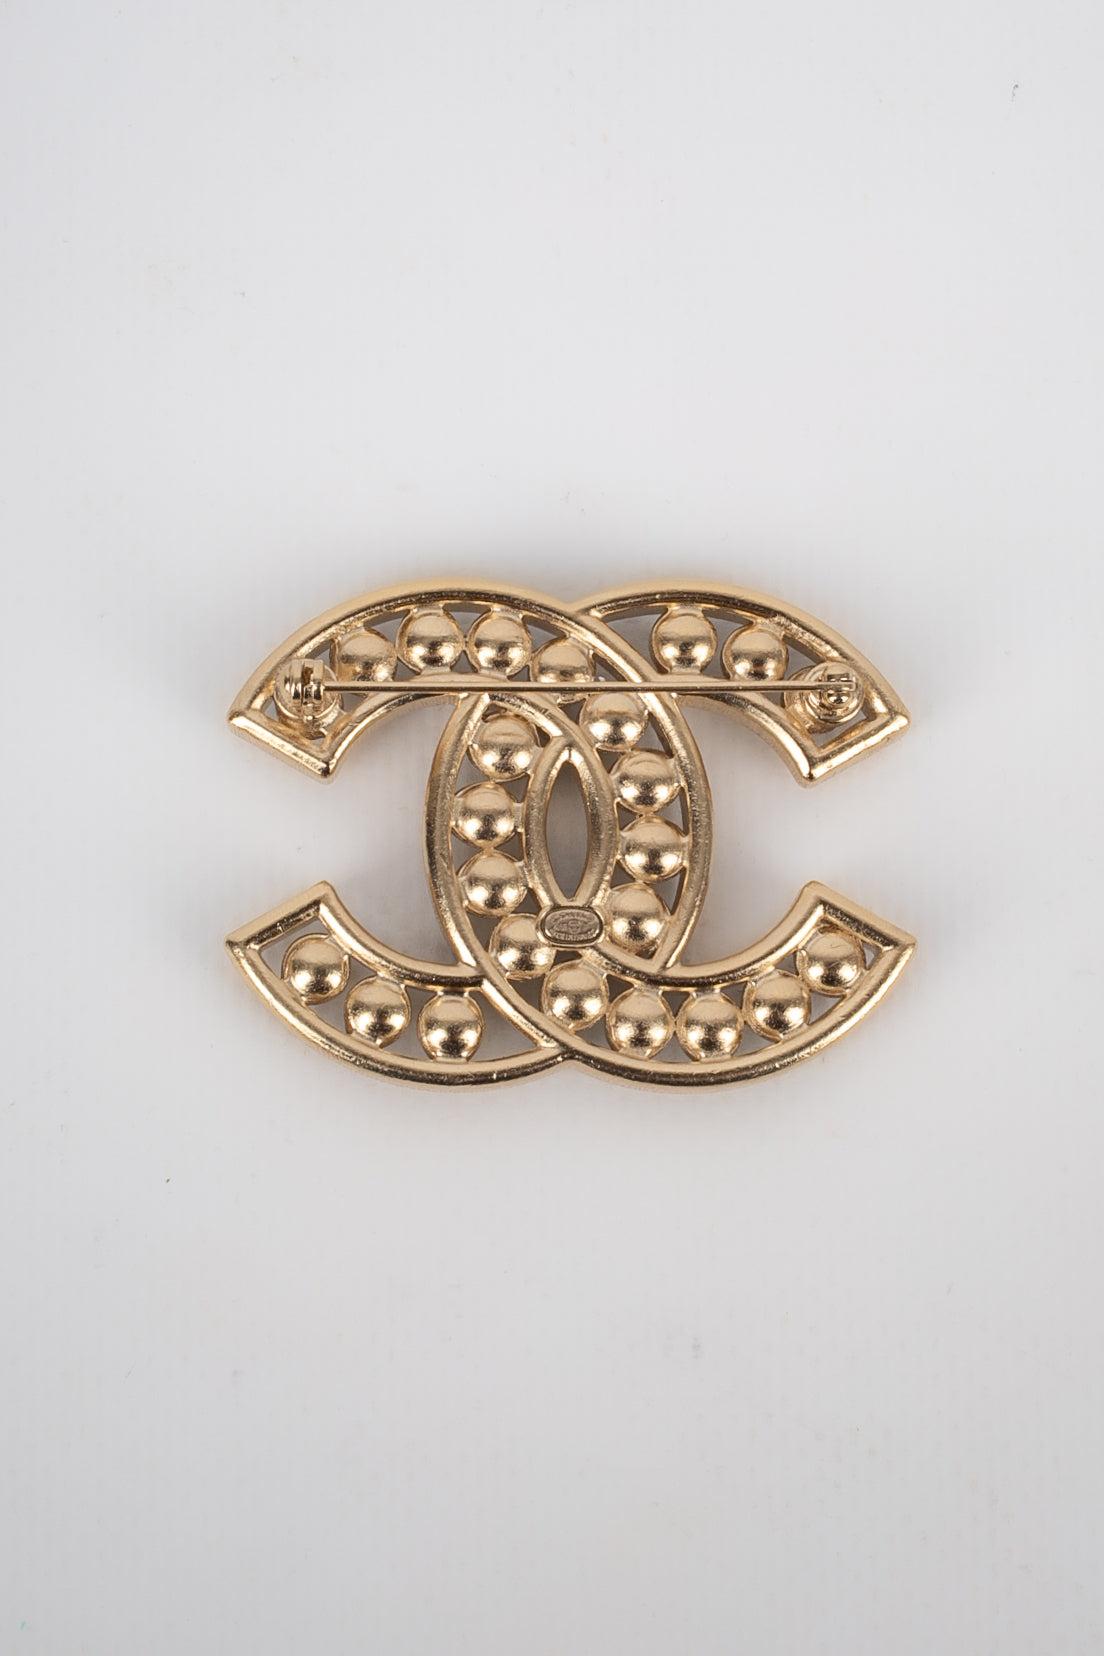 Chanel - (Made in France) Light-golden metal cc brooch ornamented with Swarovski rhinestones and costume pearls. 2018 Collection.
 
 Additional information: 
 Condition: Very good condition
 Dimensions: 5.5 cm x 4 cm
 Period: 21st Century
 
 Seller